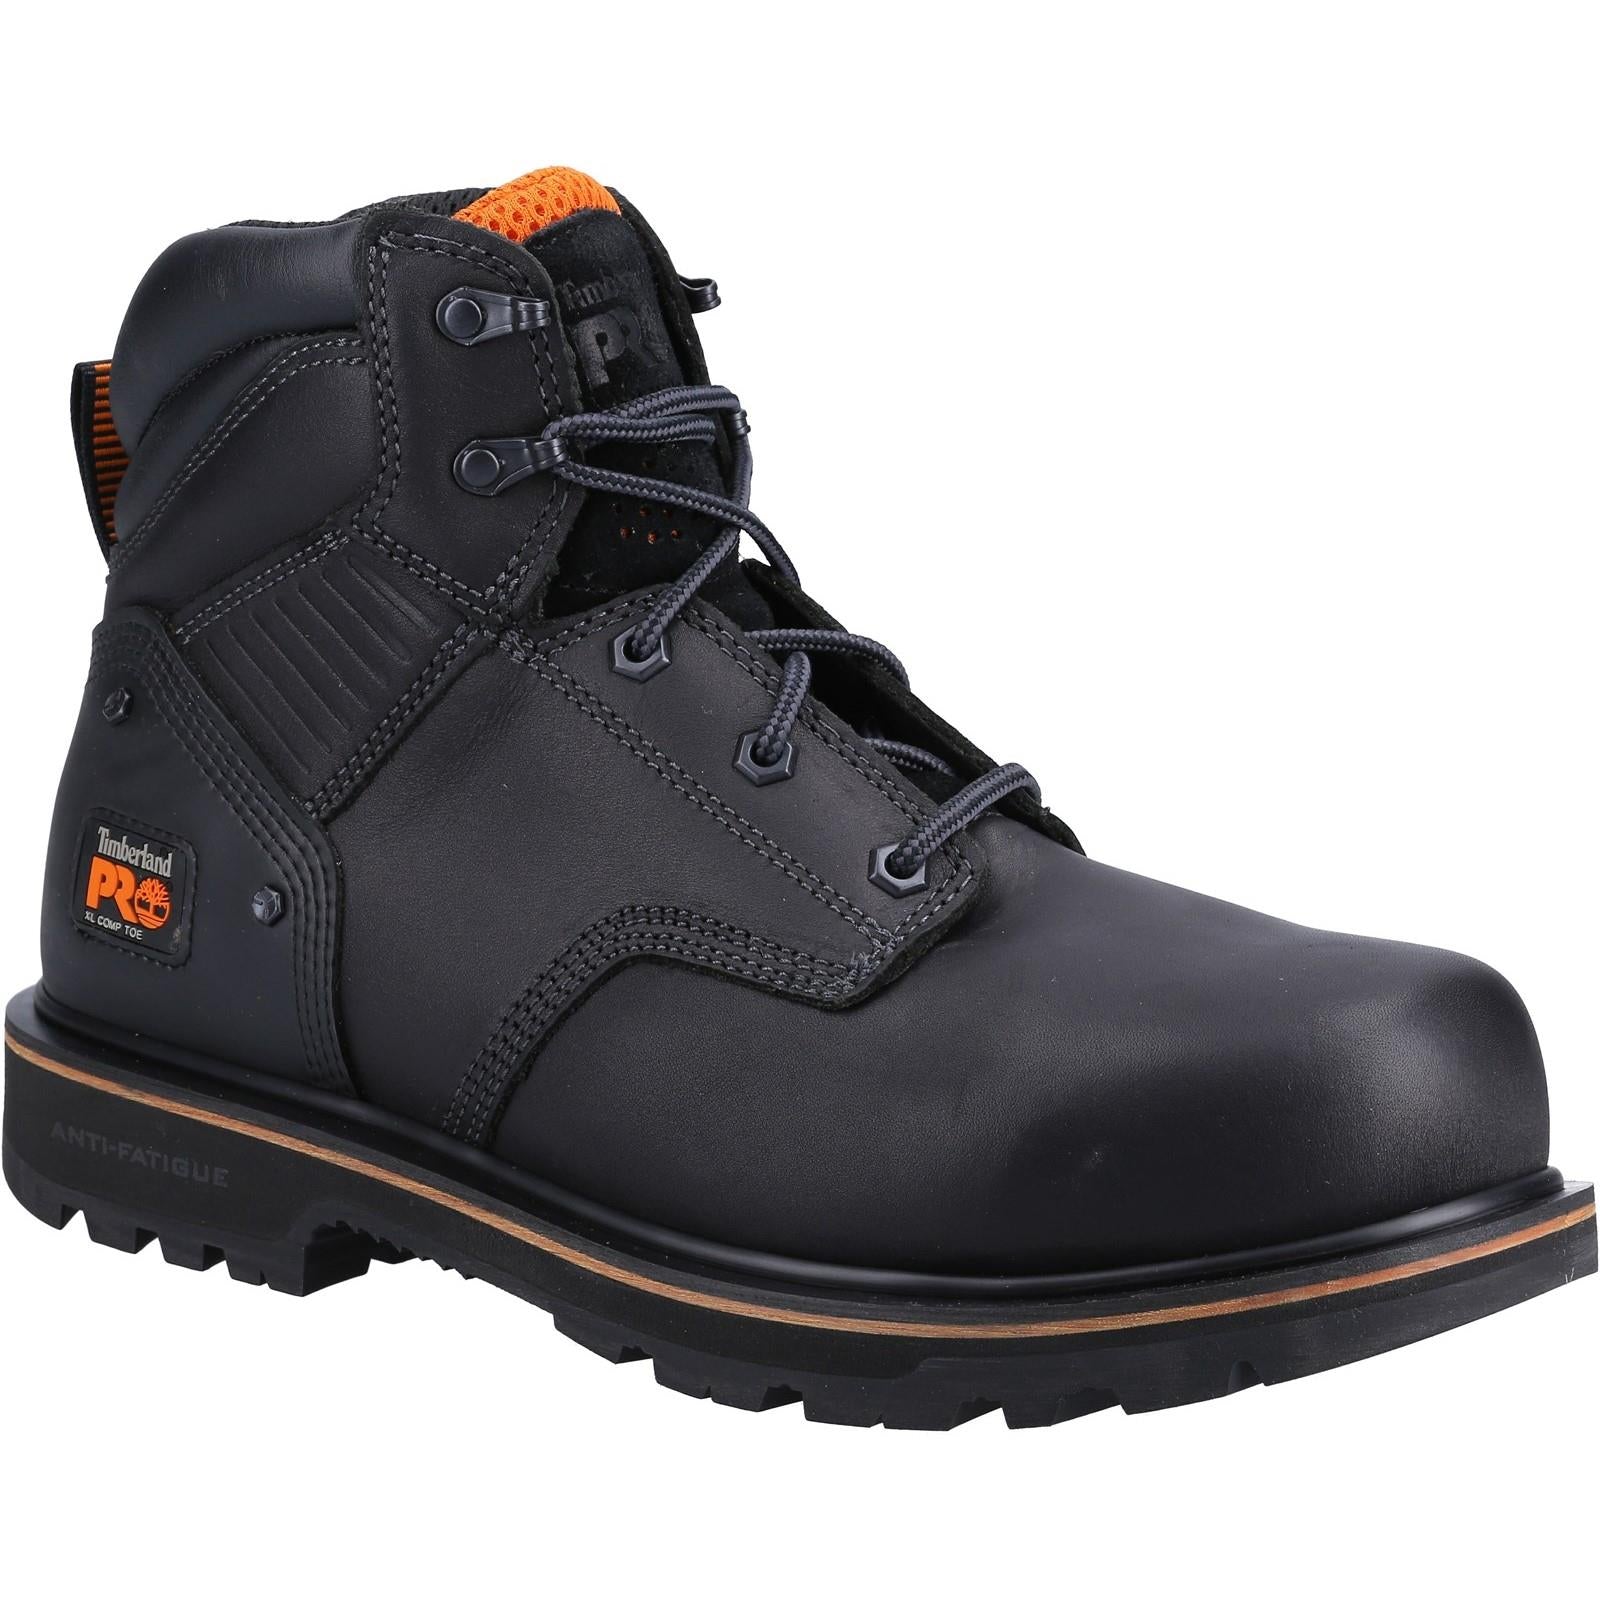 Timberland Pro Ballast S1P black composite toe/midsole work safety boots